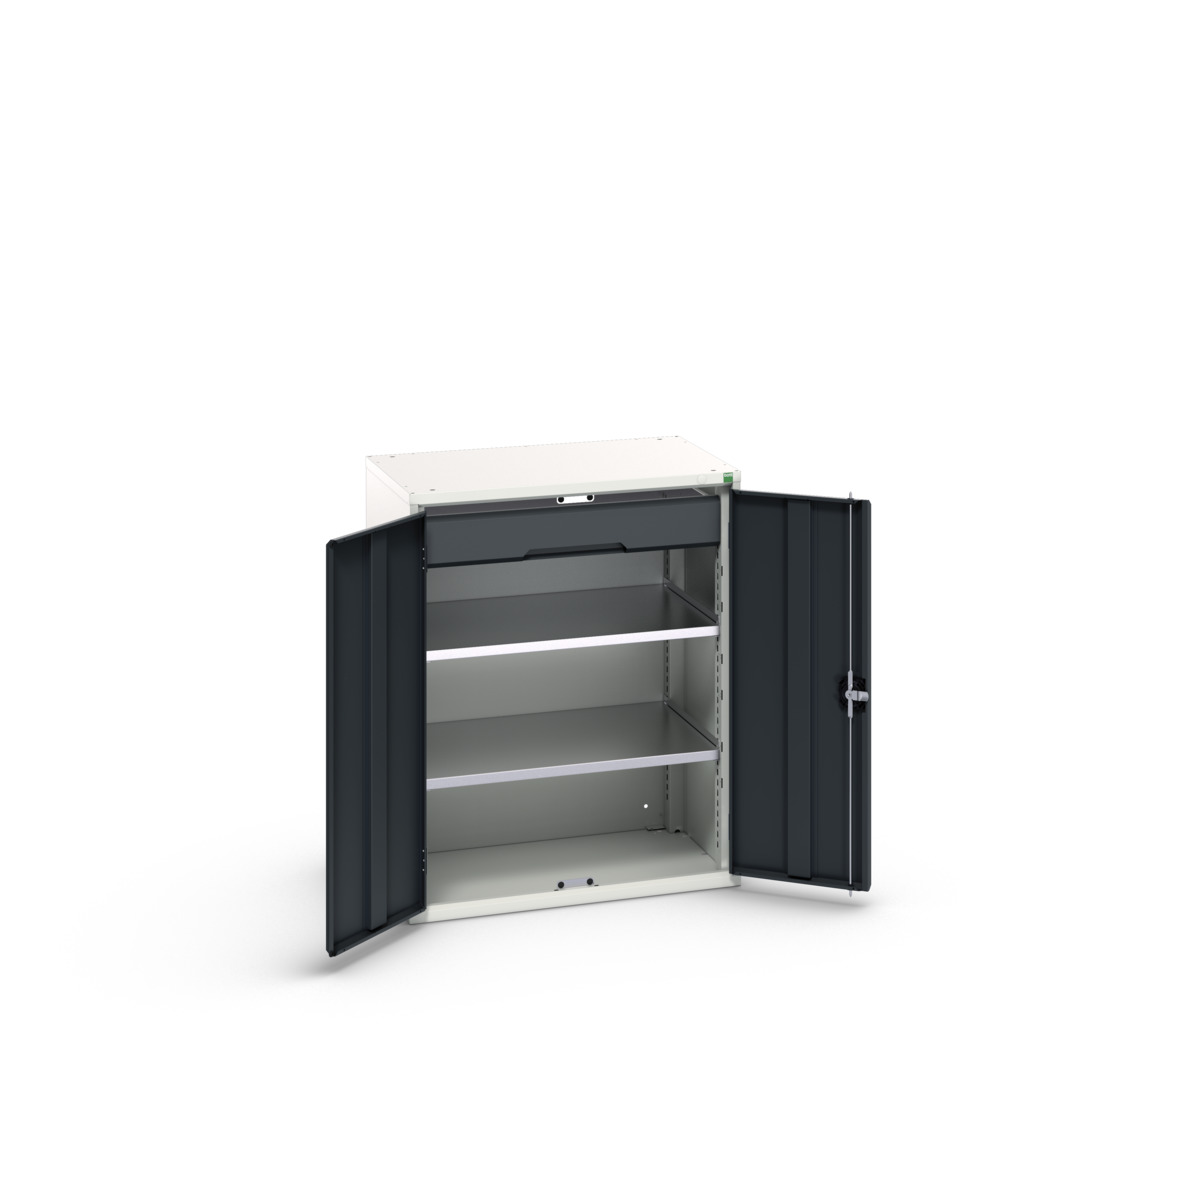 16926452.19 - verso kitted cupboard